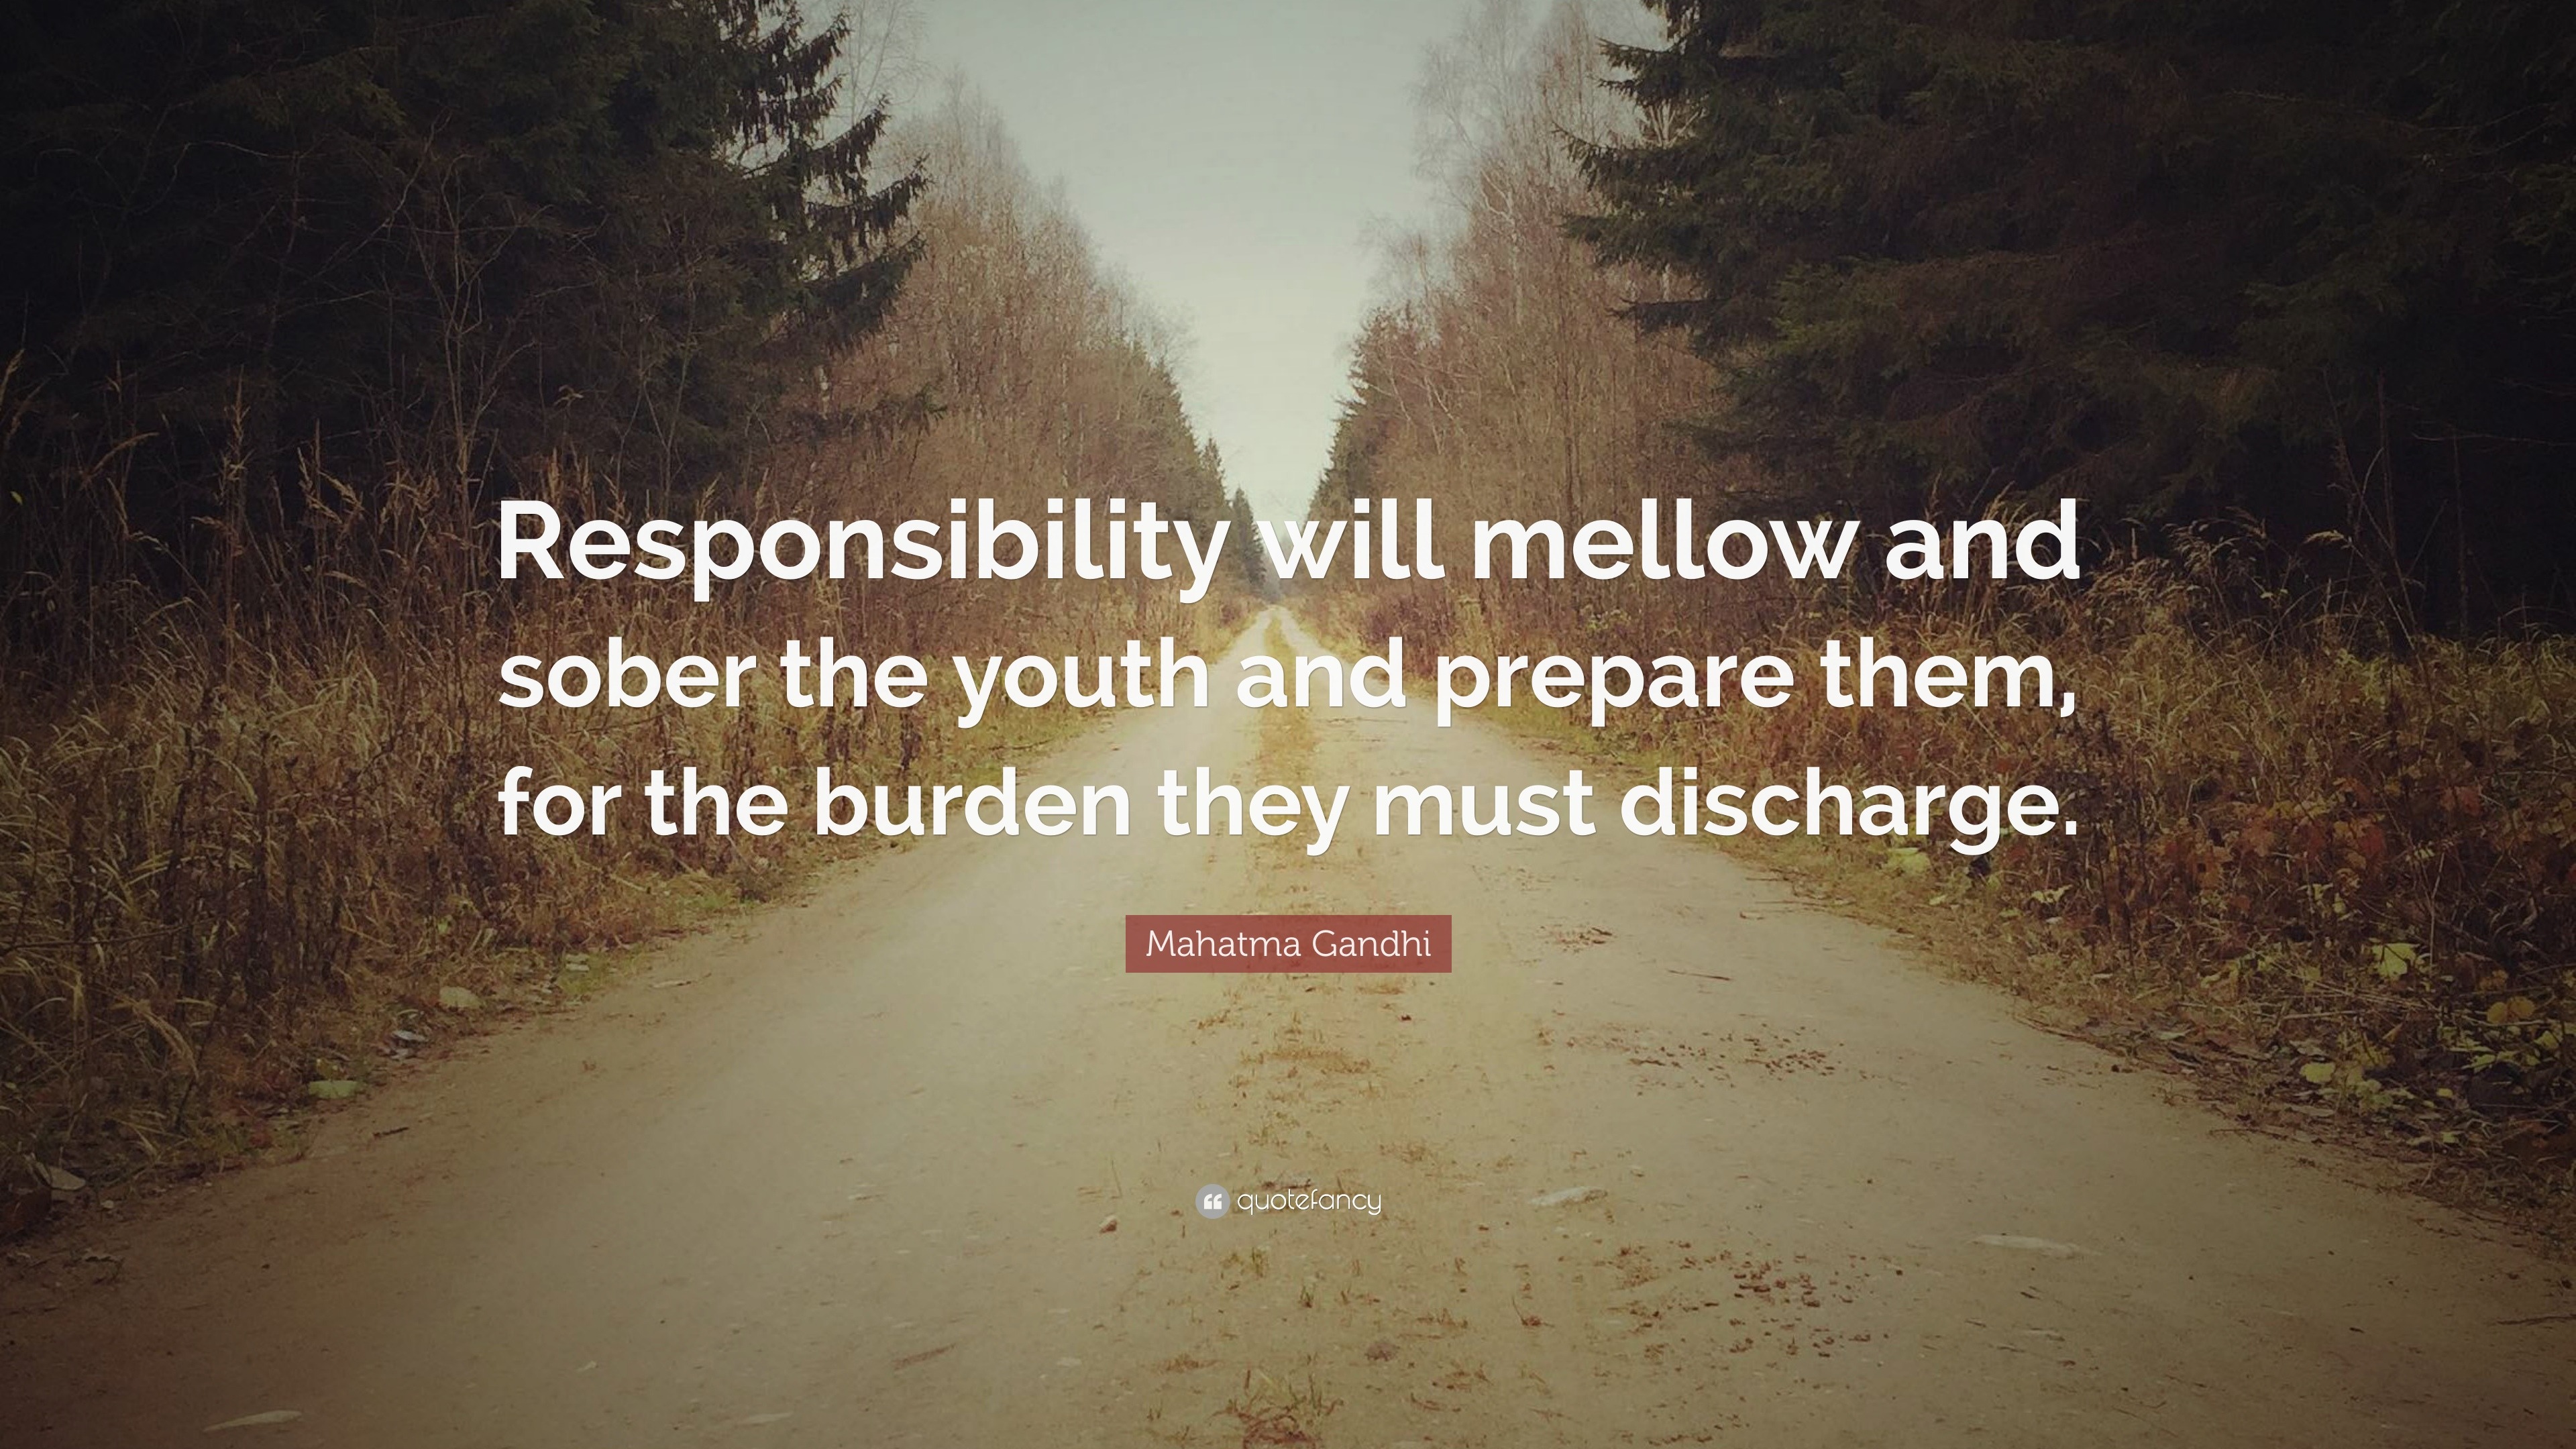 Mahatma Gandhi Quote Responsibility Will Mellow And Sober The Youth And Prepare Them For The Burden